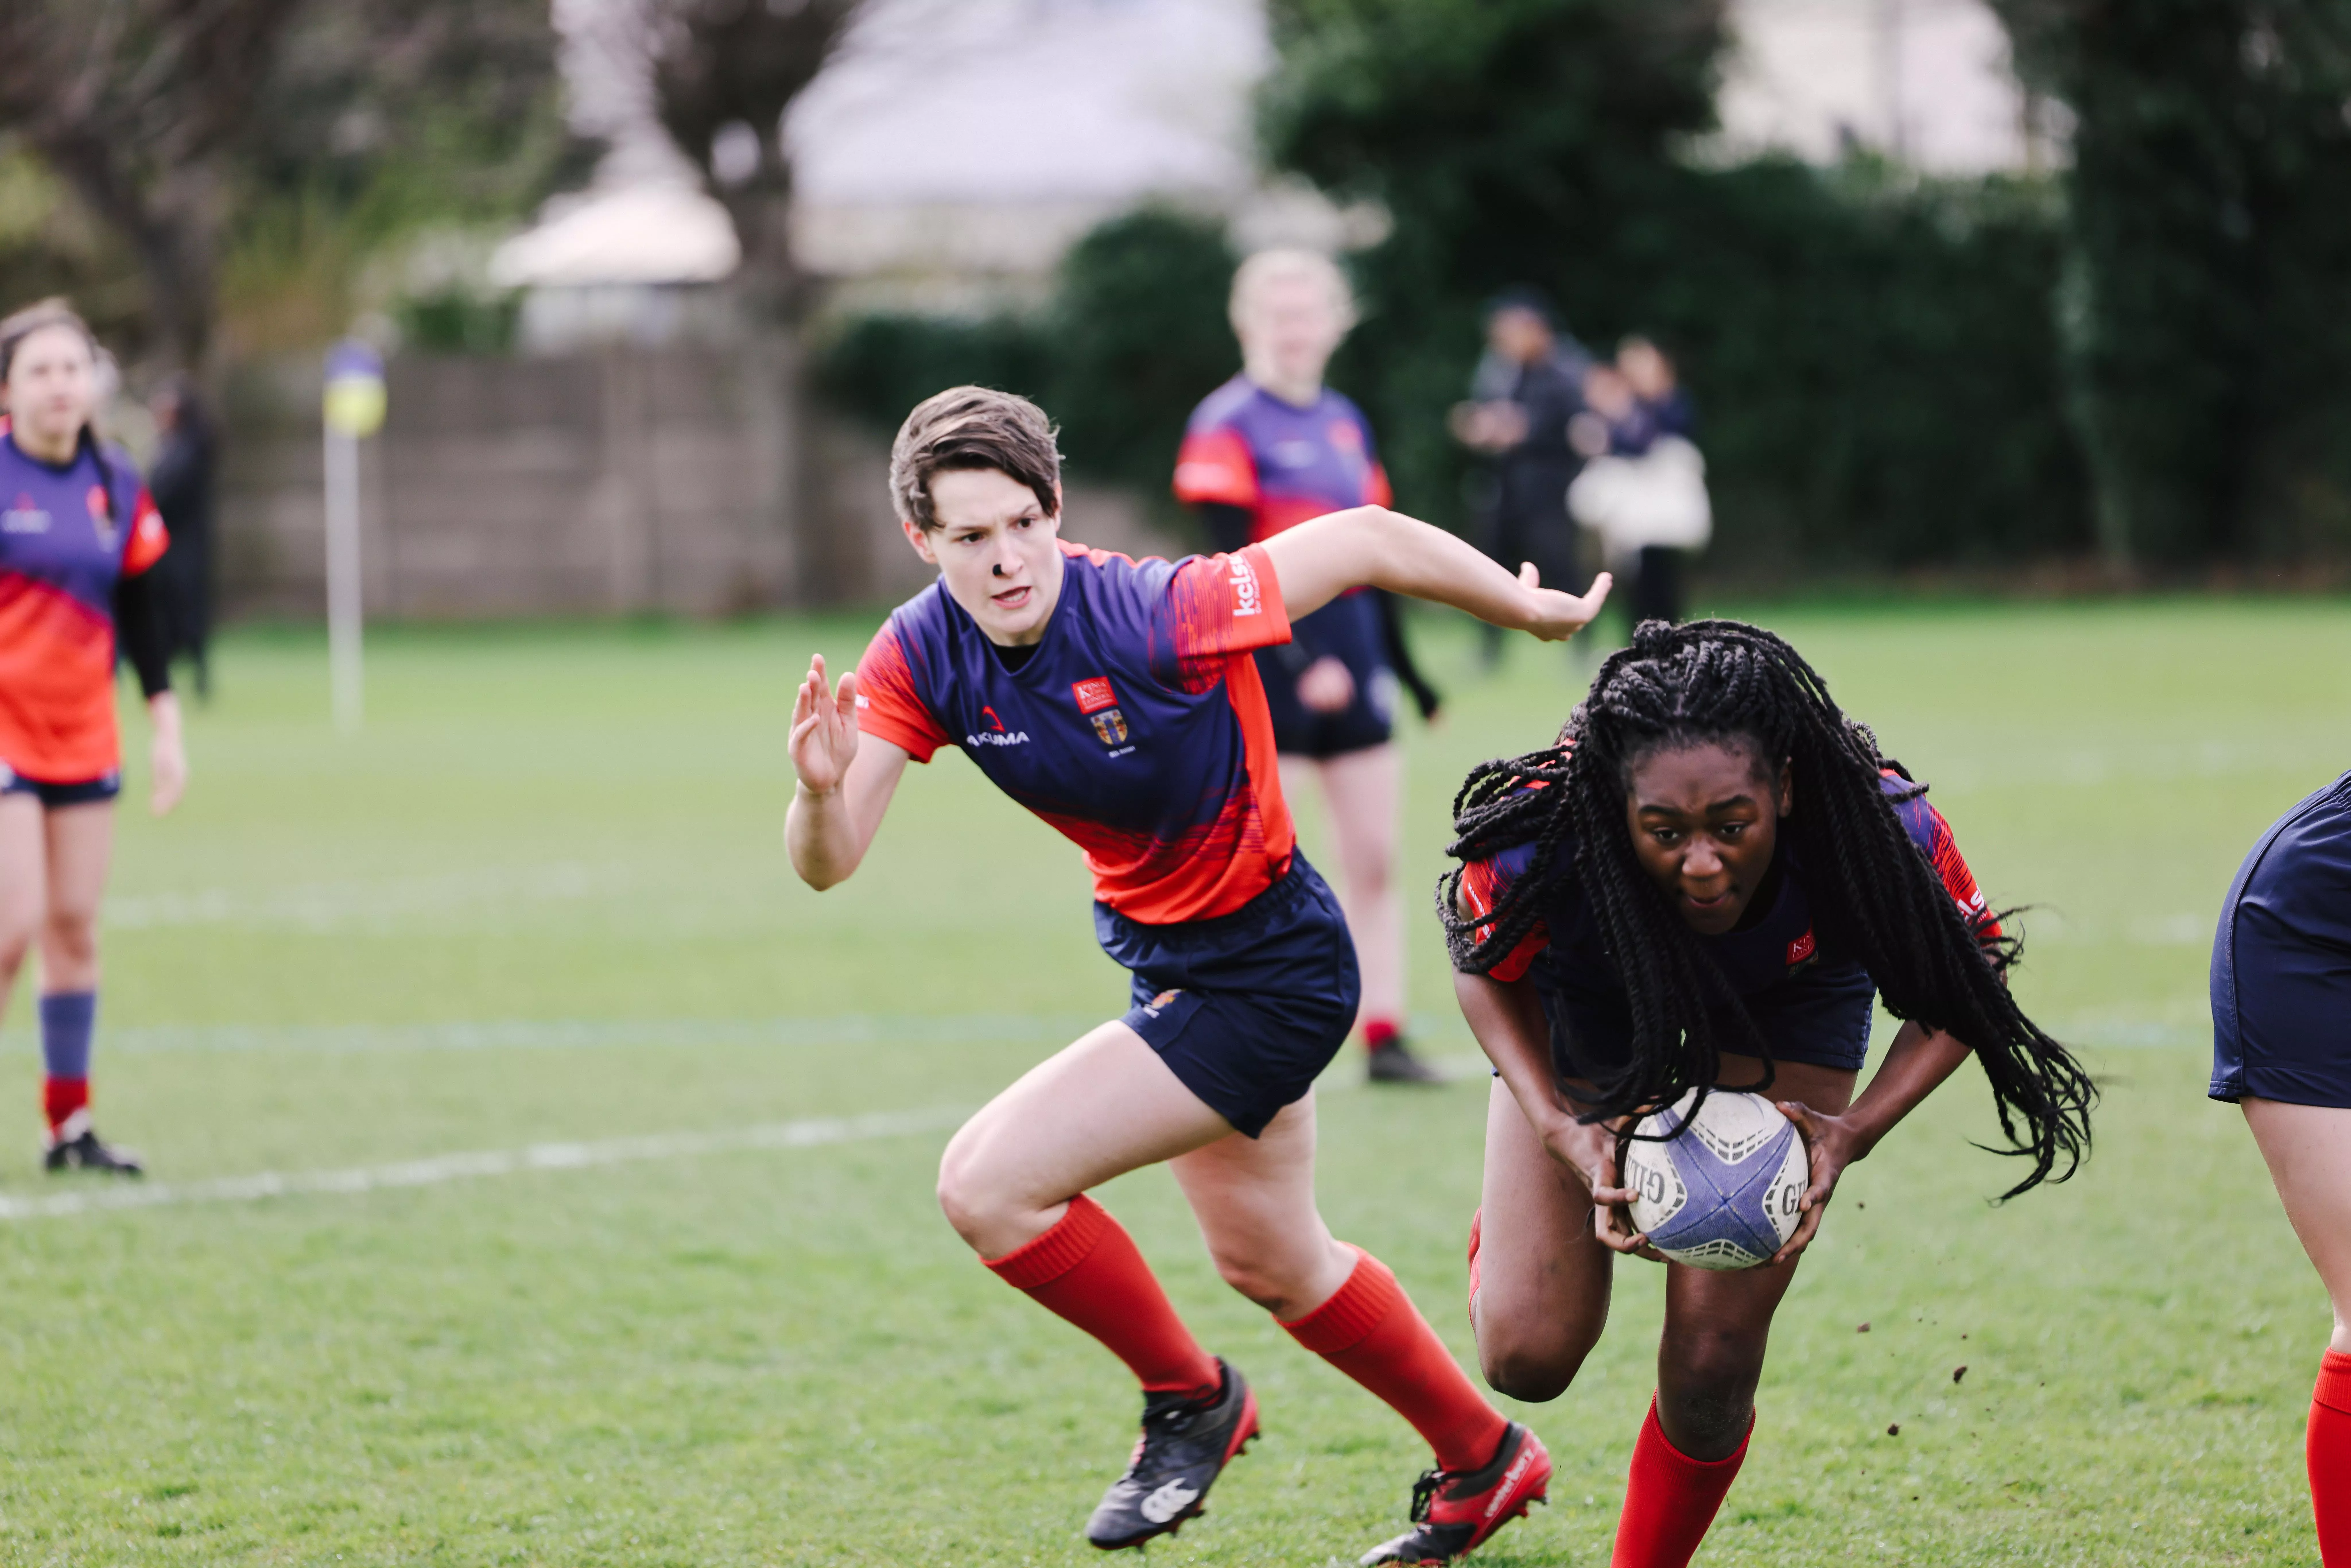 A group of women playing rugby